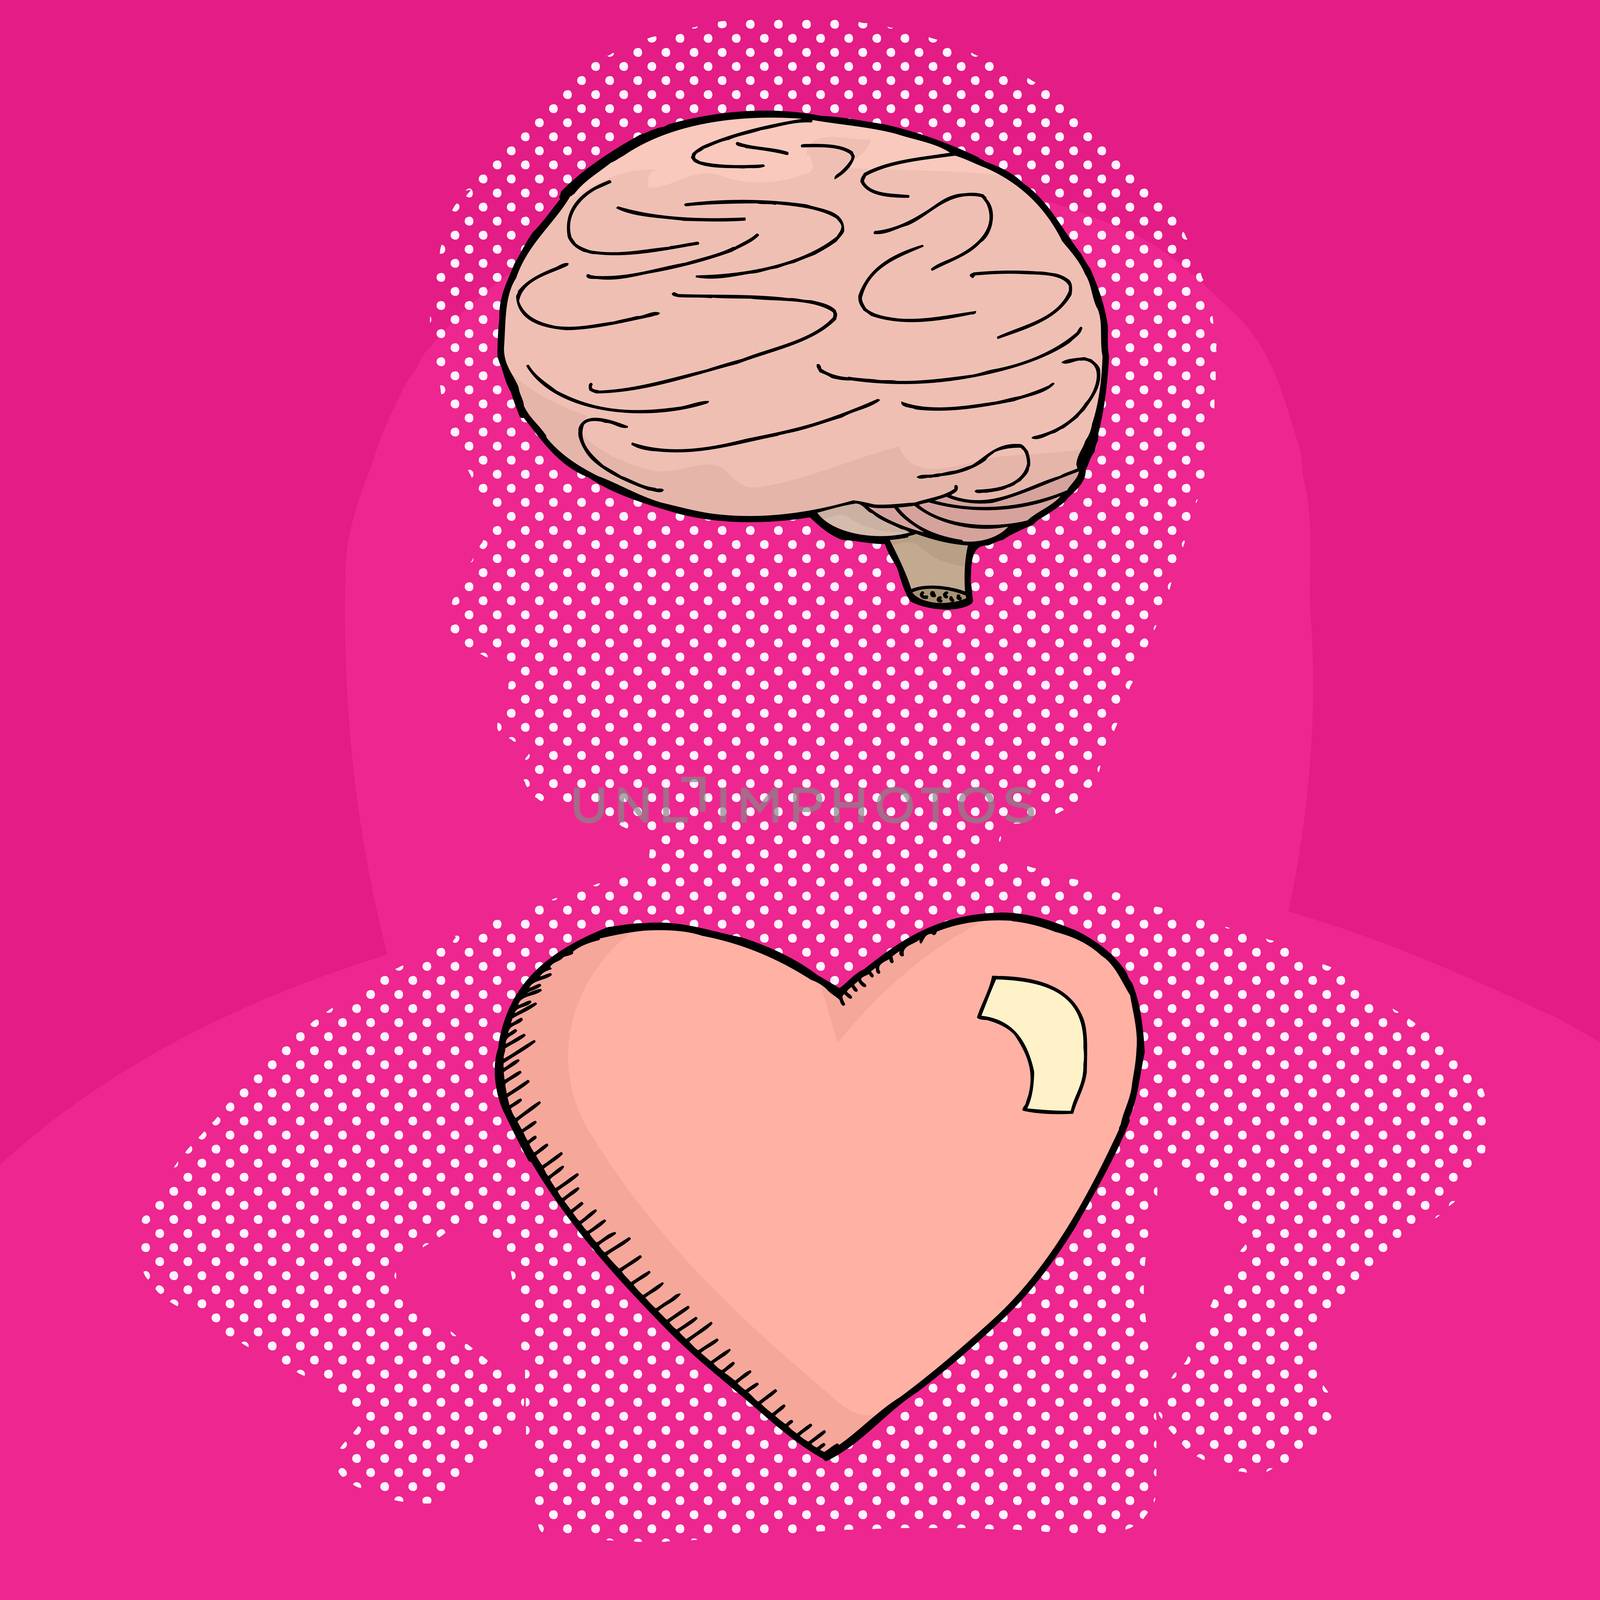 Symbol of person with brain and heart over pink background